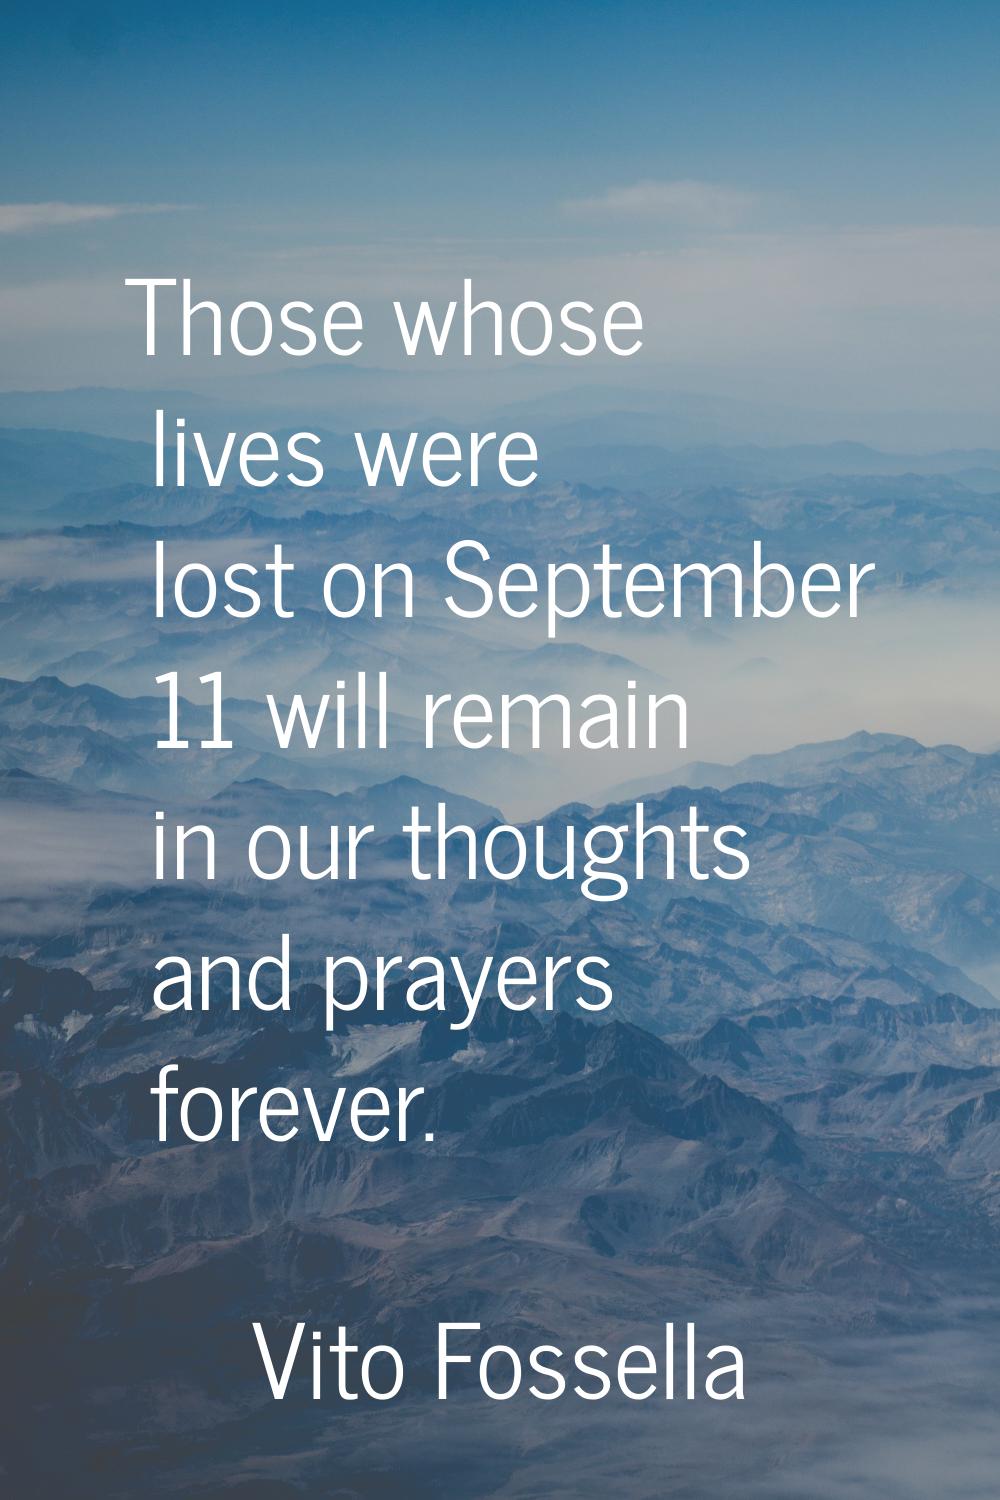 Those whose lives were lost on September 11 will remain in our thoughts and prayers forever.